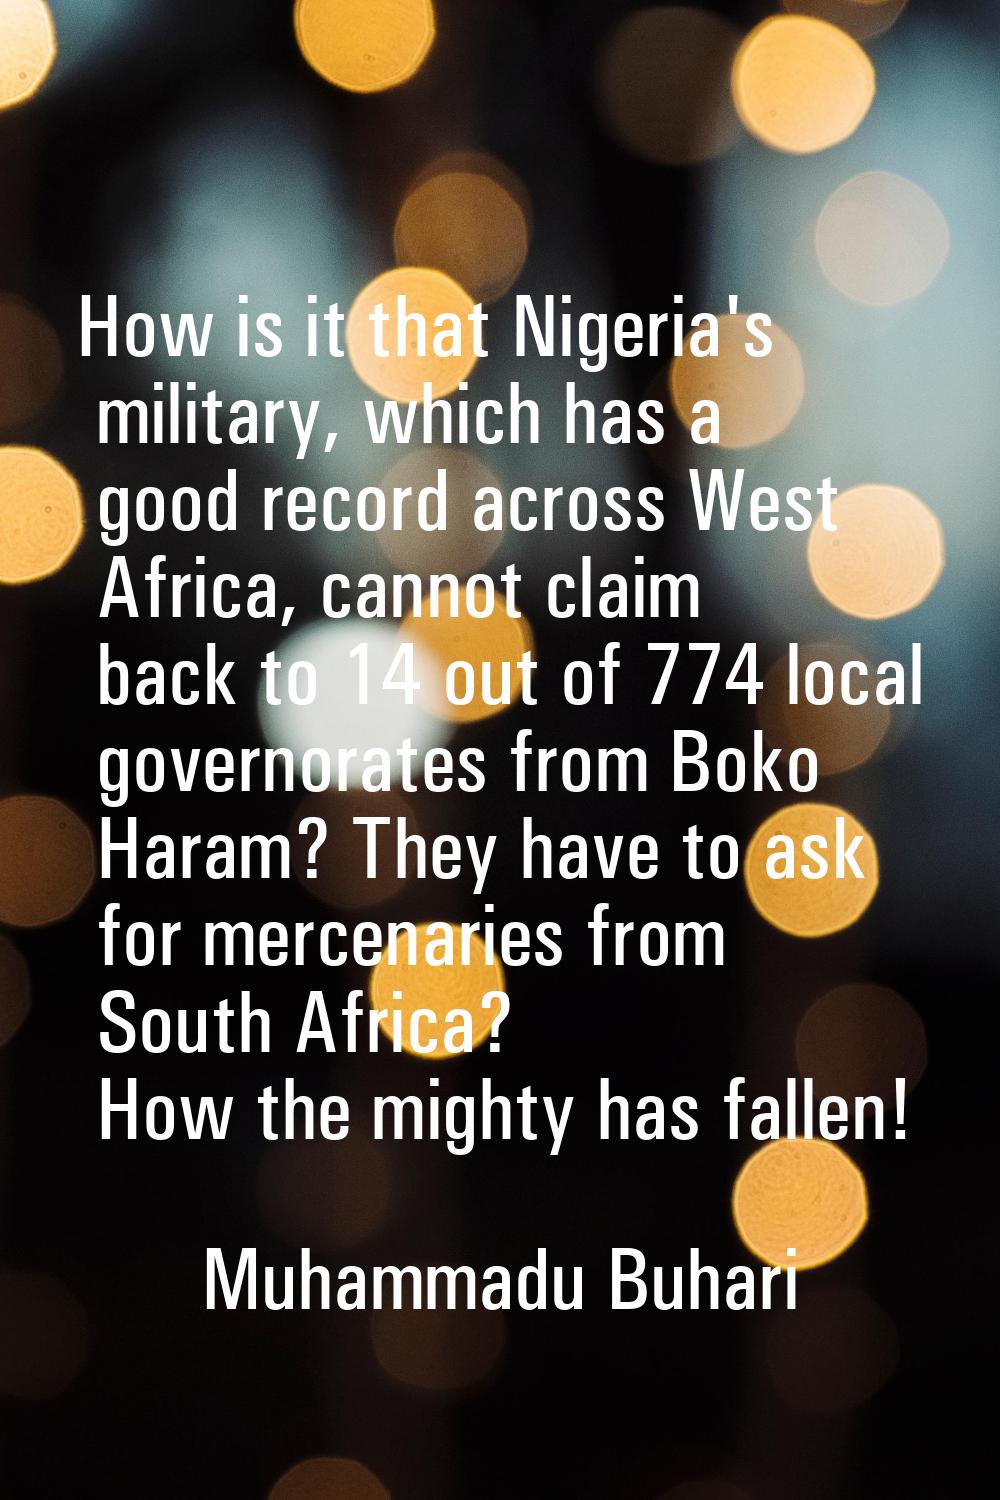 How is it that Nigeria's military, which has a good record across West Africa, cannot claim back to